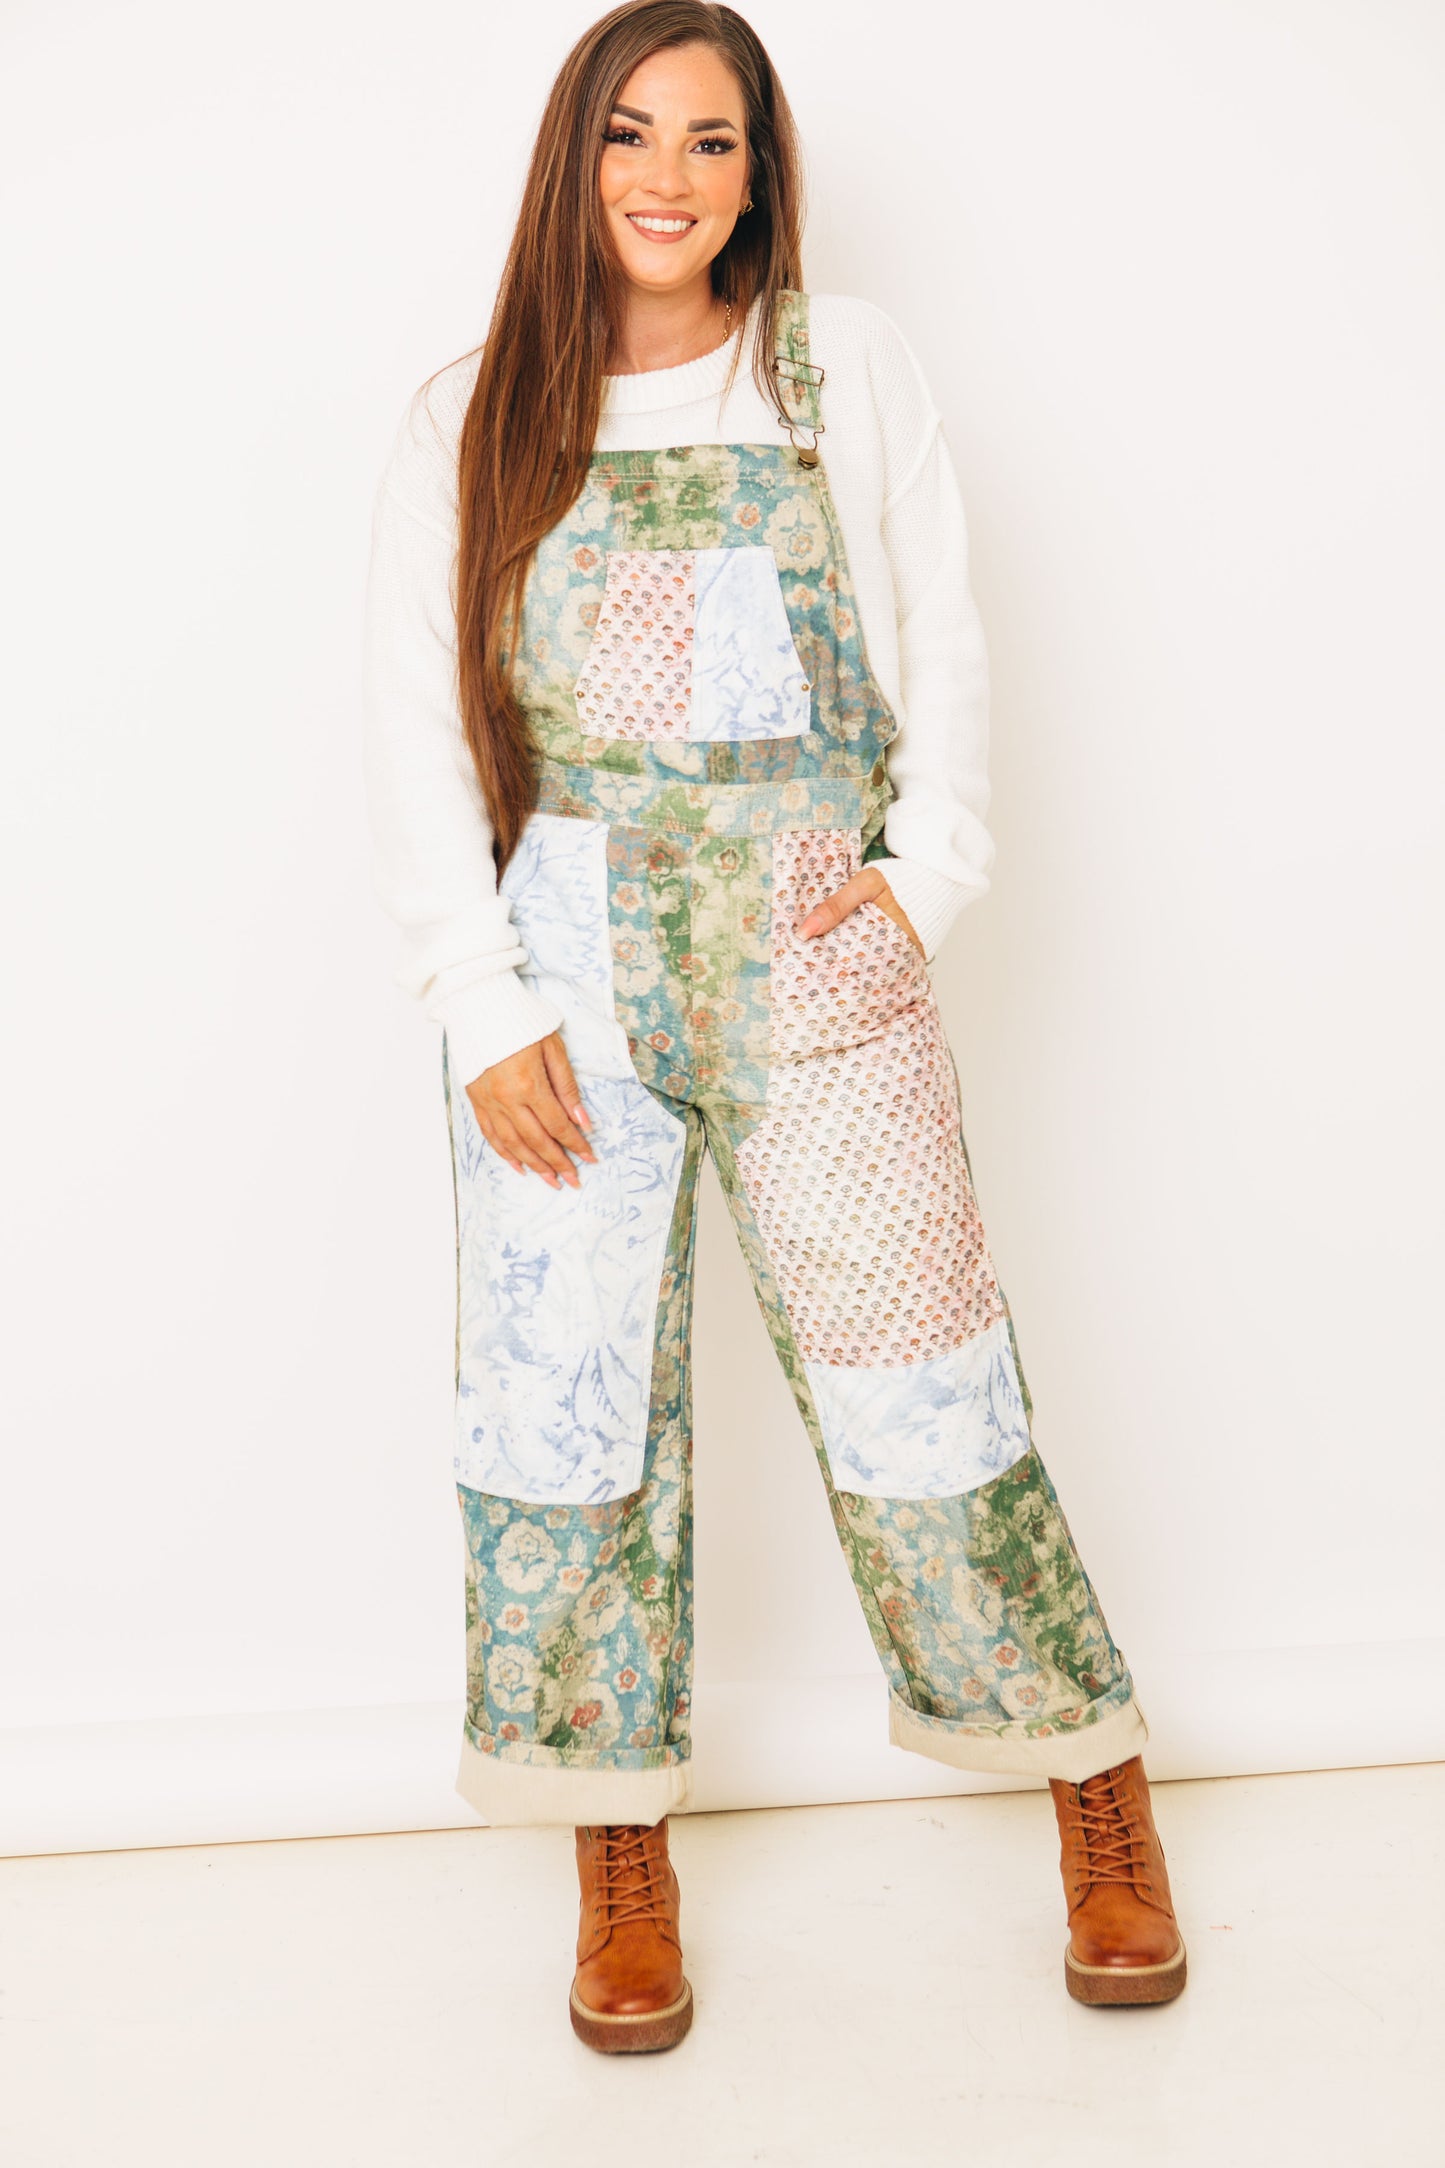 Palette Poetry - Mixed Floral Print Twill Overalls (S-L)